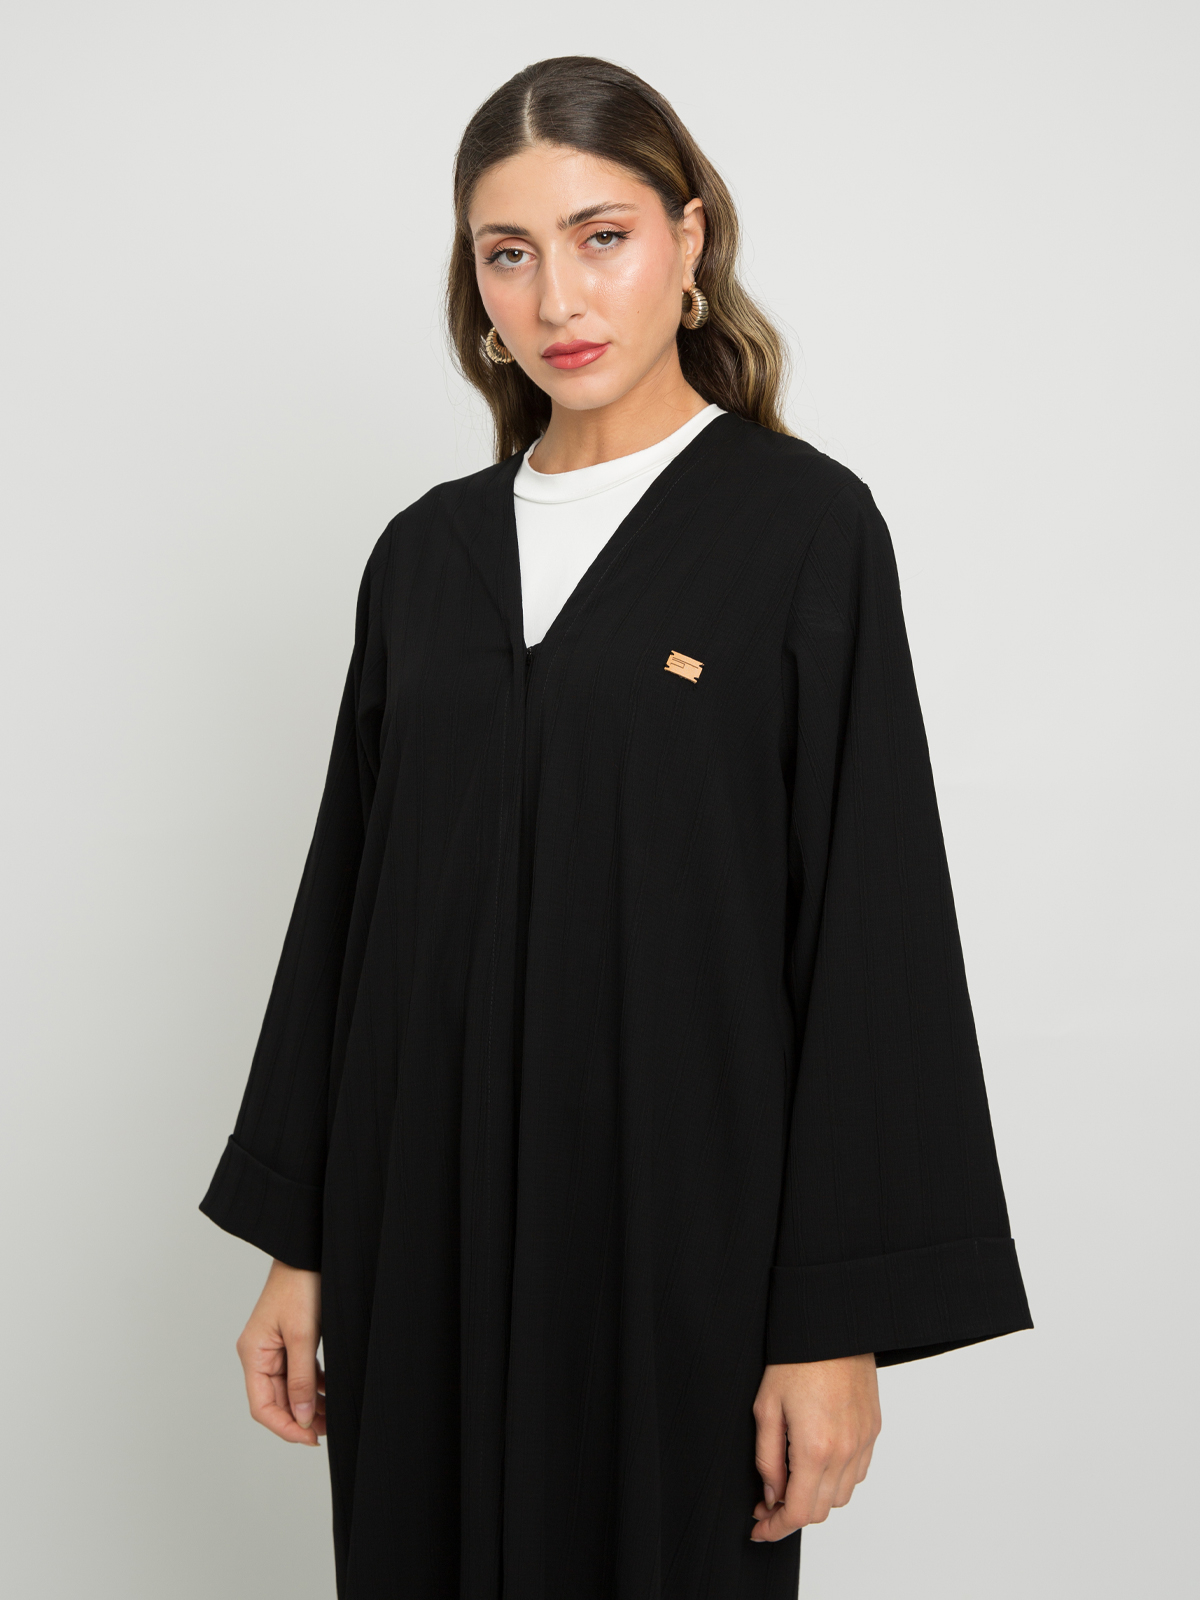 Black v-neck abaya closed with buttons and rolled cuffs in striped fabric online by kaafmeem